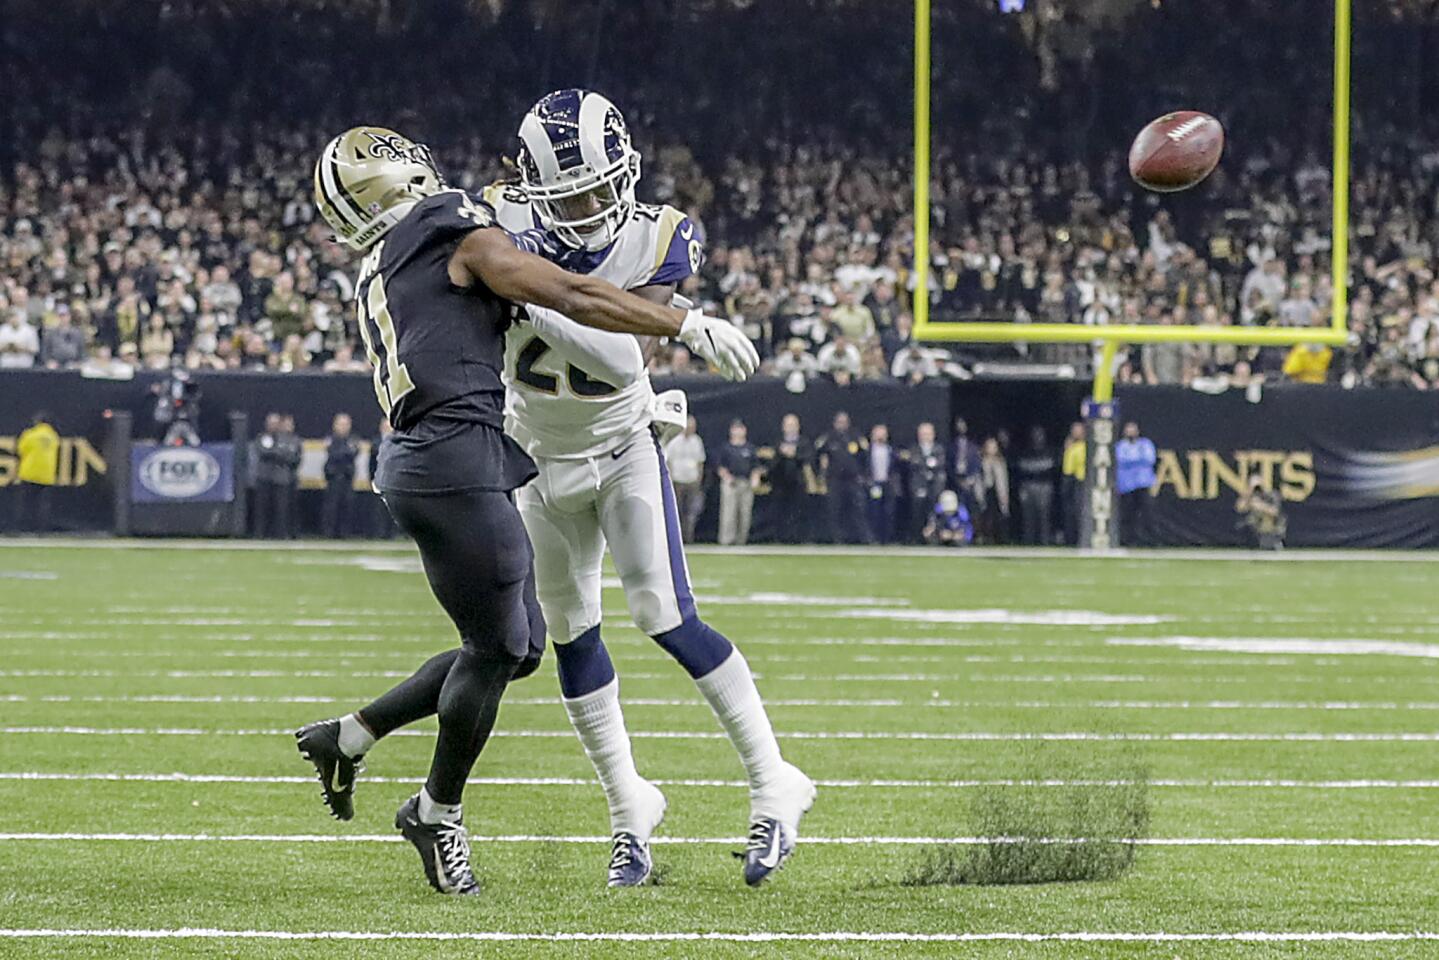 Rams cornerback Nickell Robey-Coleman seems to deliver an early hit to New Orleans Saints rexeiver Tommylee Lewis late in the fourth quarter, thwarting a potential game-winning drive in the NFC Championship at the Superdome.